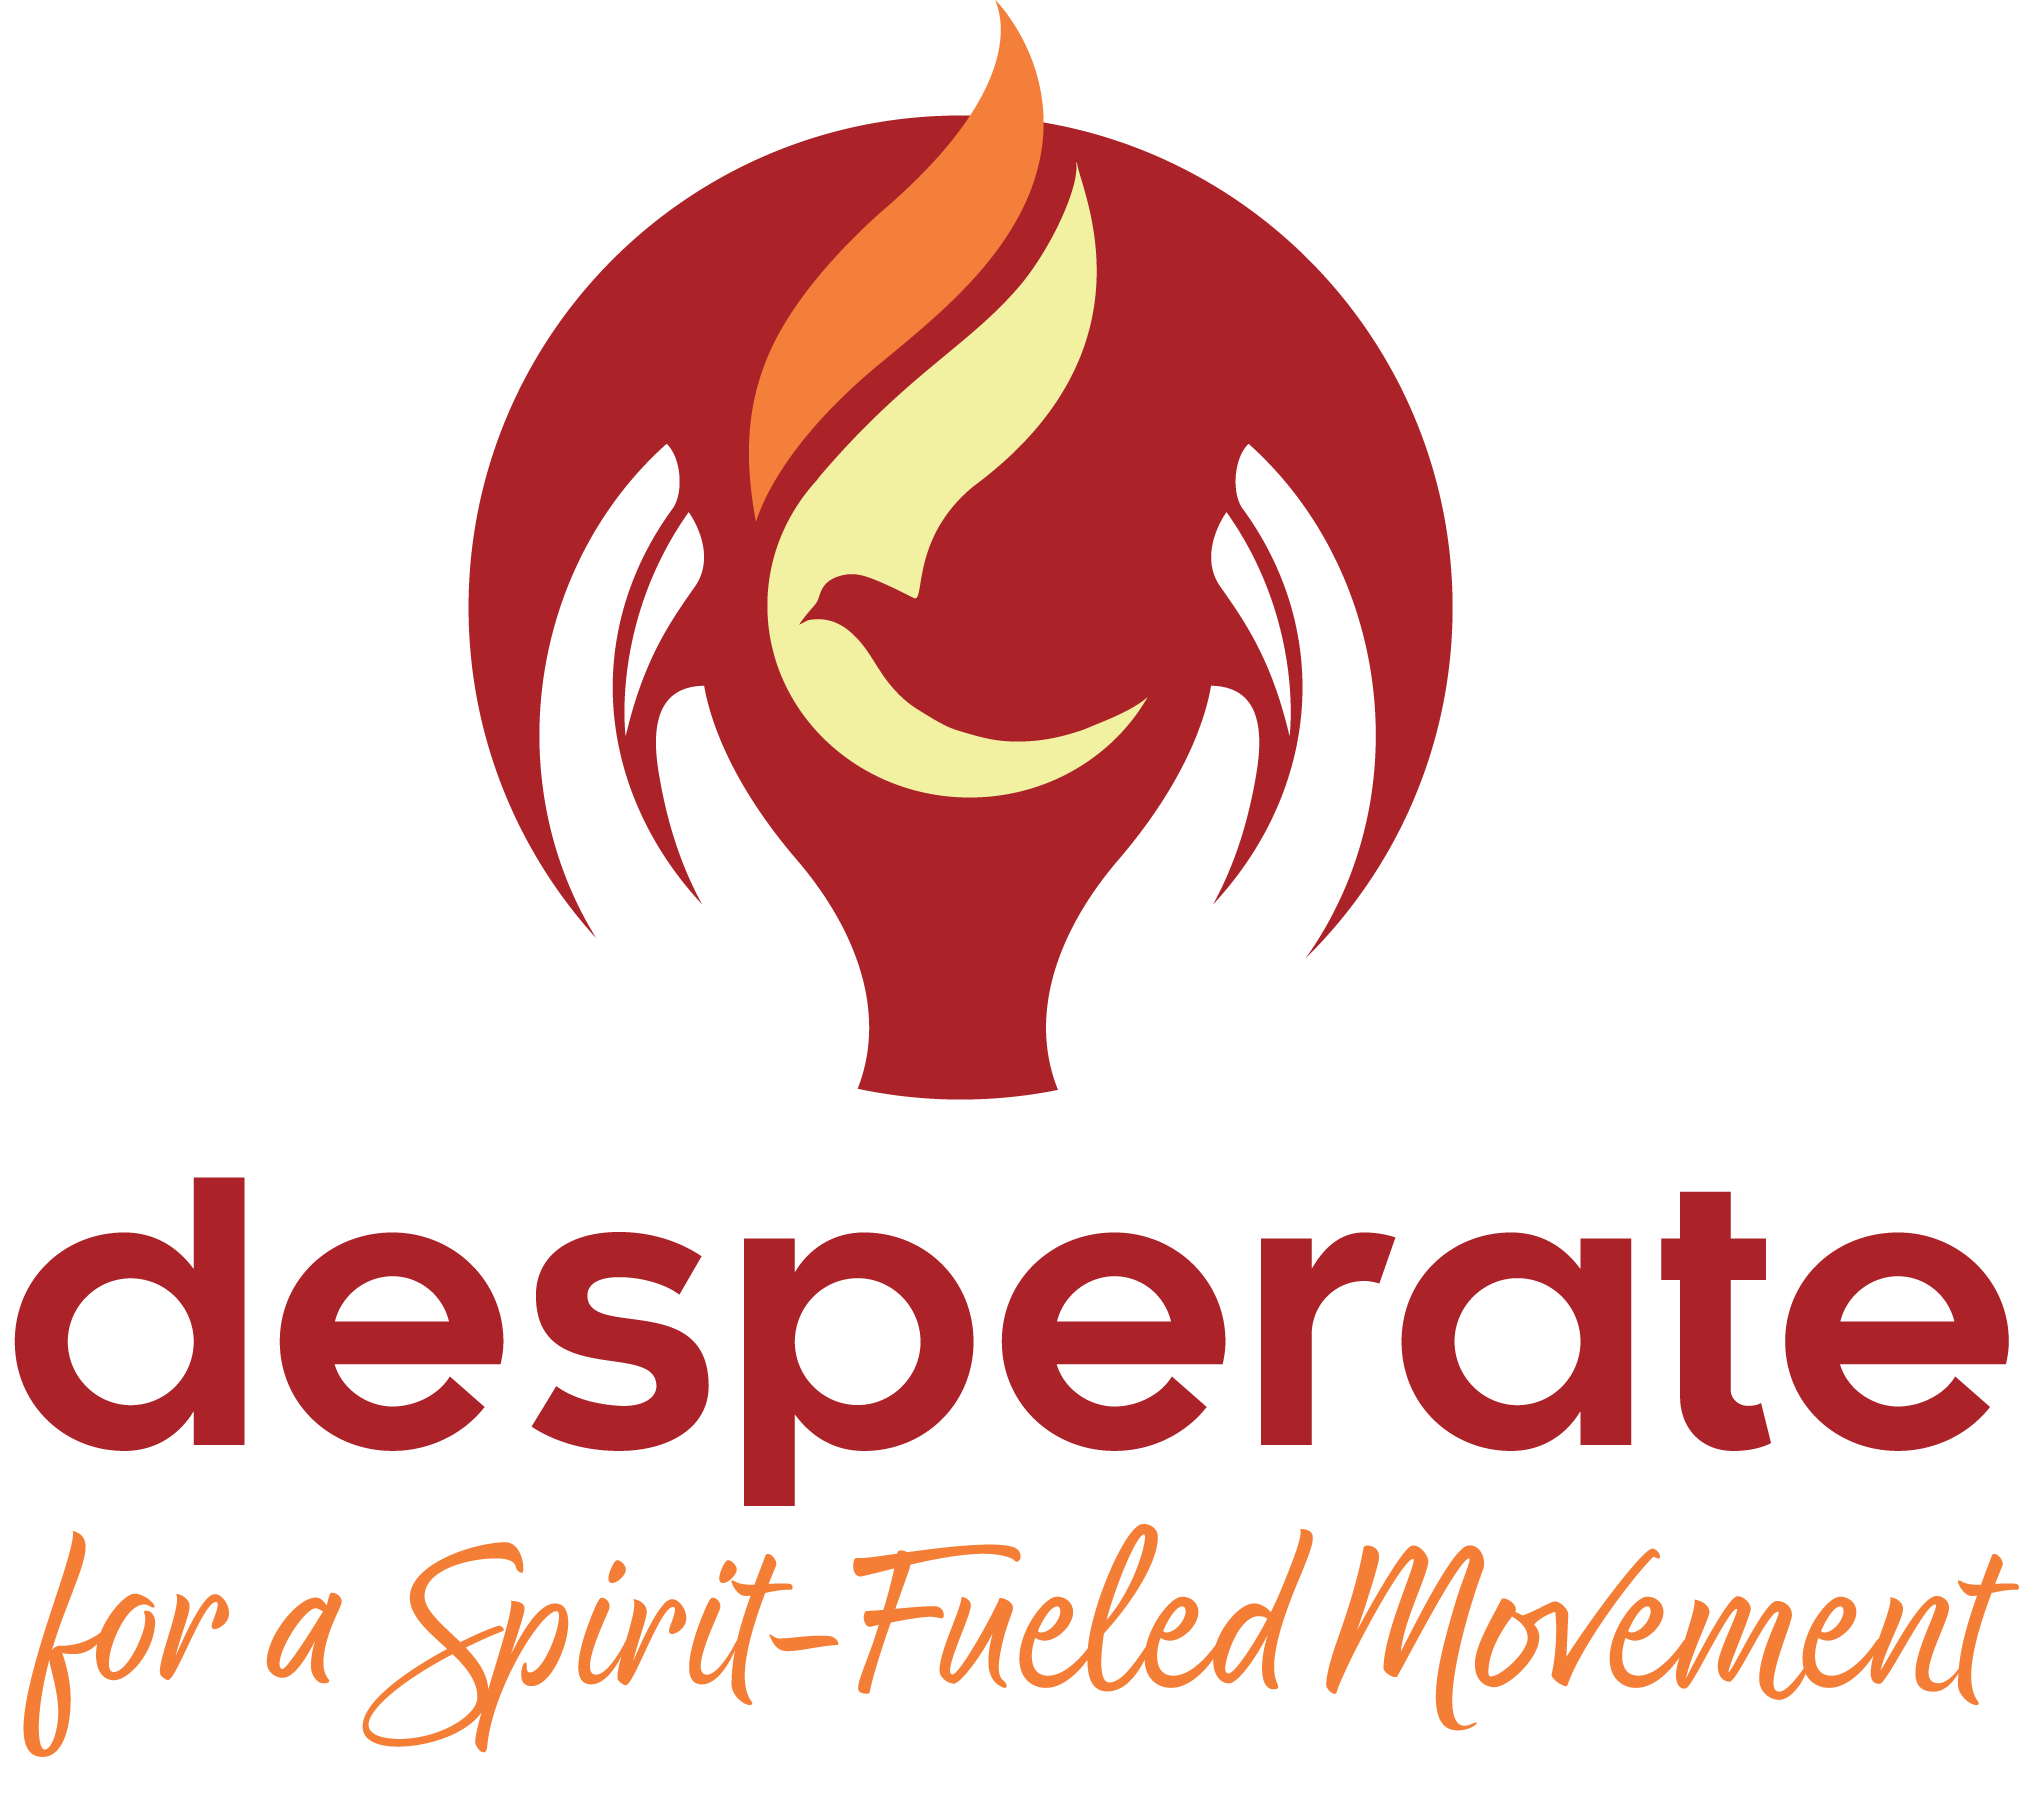 Desperate for a Spirit-Filled Movement with hands holding dove-flame emblem in red, orange, and yellow